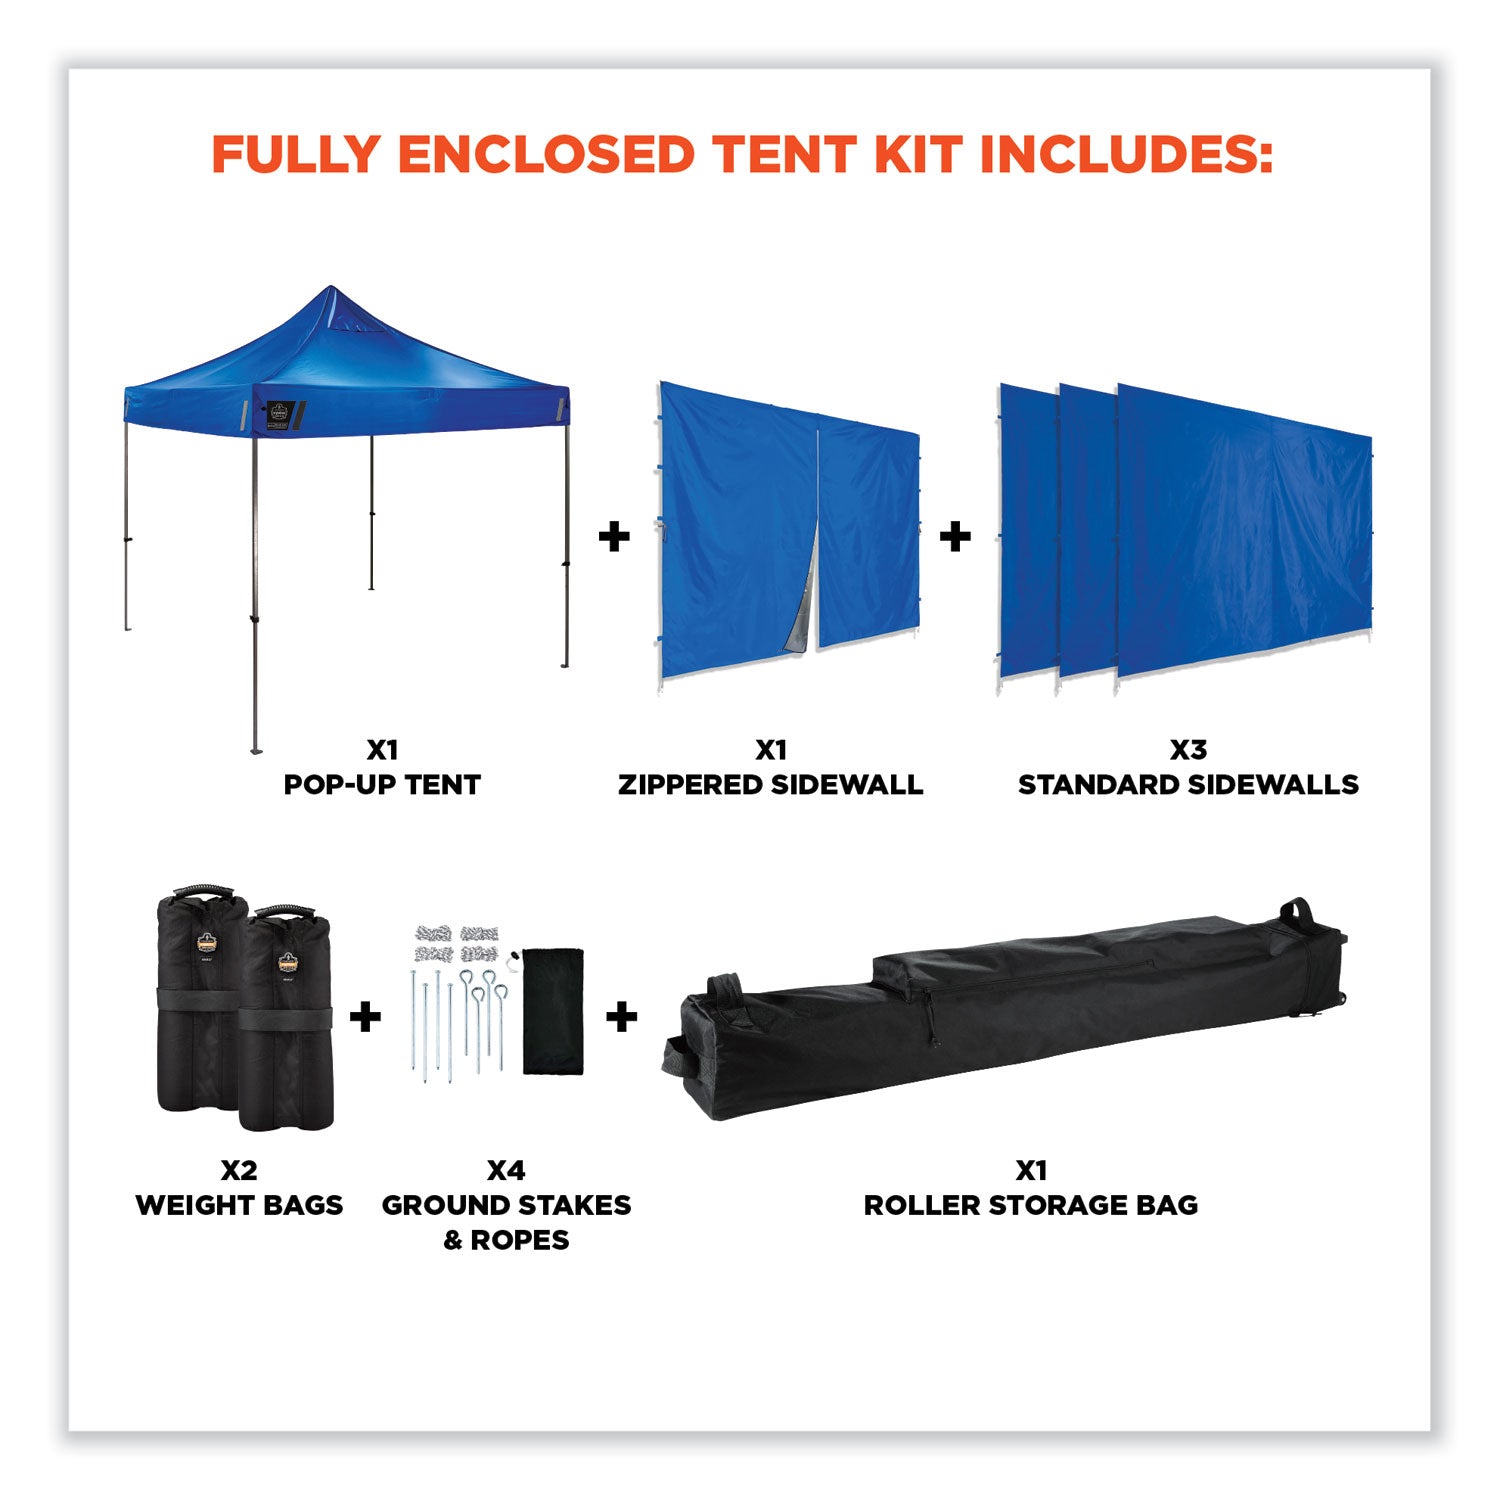 shax-6053-enclosed-pop-up-tent-kit-single-skin-10-ft-x-10-ft-polyester-steel-blue-ships-in-1-3-business-days_ego12977 - 2